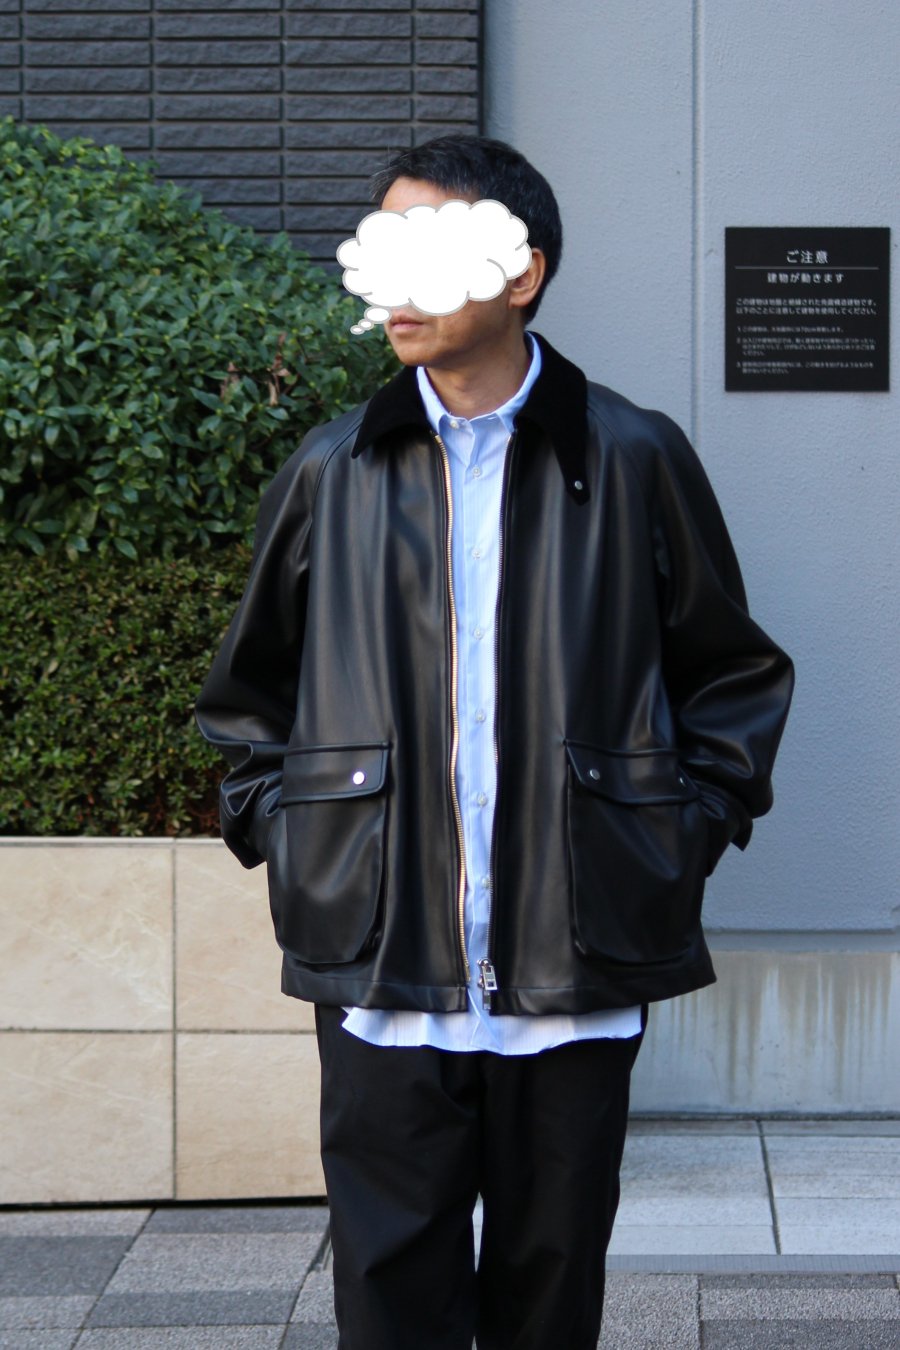 CINOH（チノ）SYNTHETIC LEATHER HUNTING JACKET 公式通販